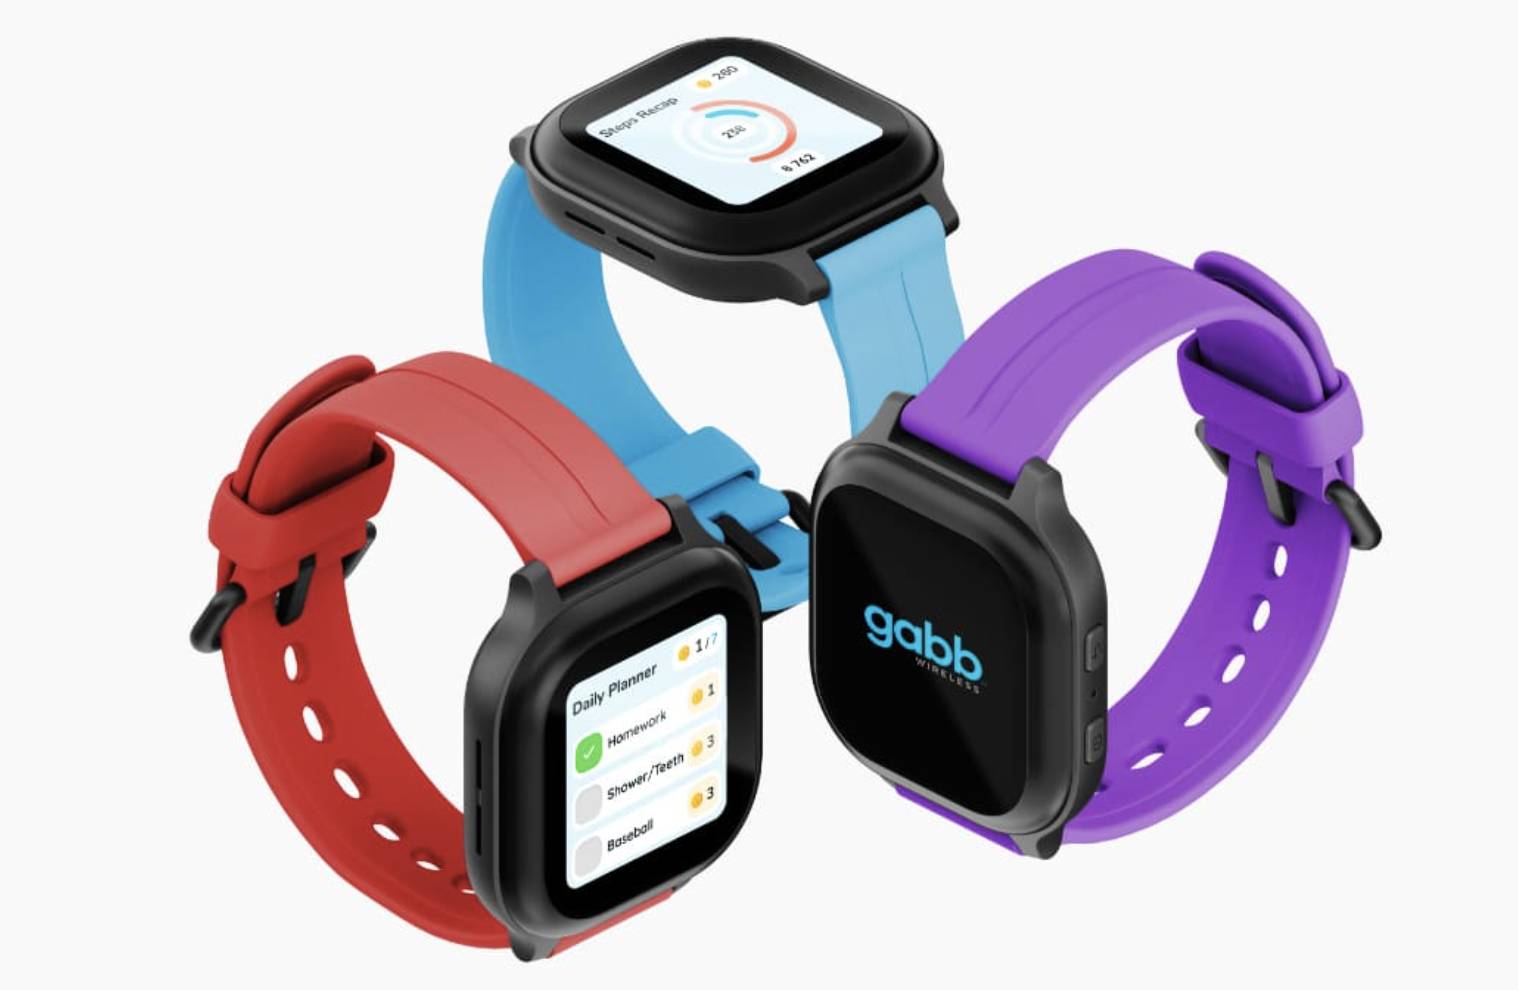 The Gabb Watch: A Kid's First Smartwatch That Helps Keep Them Safe